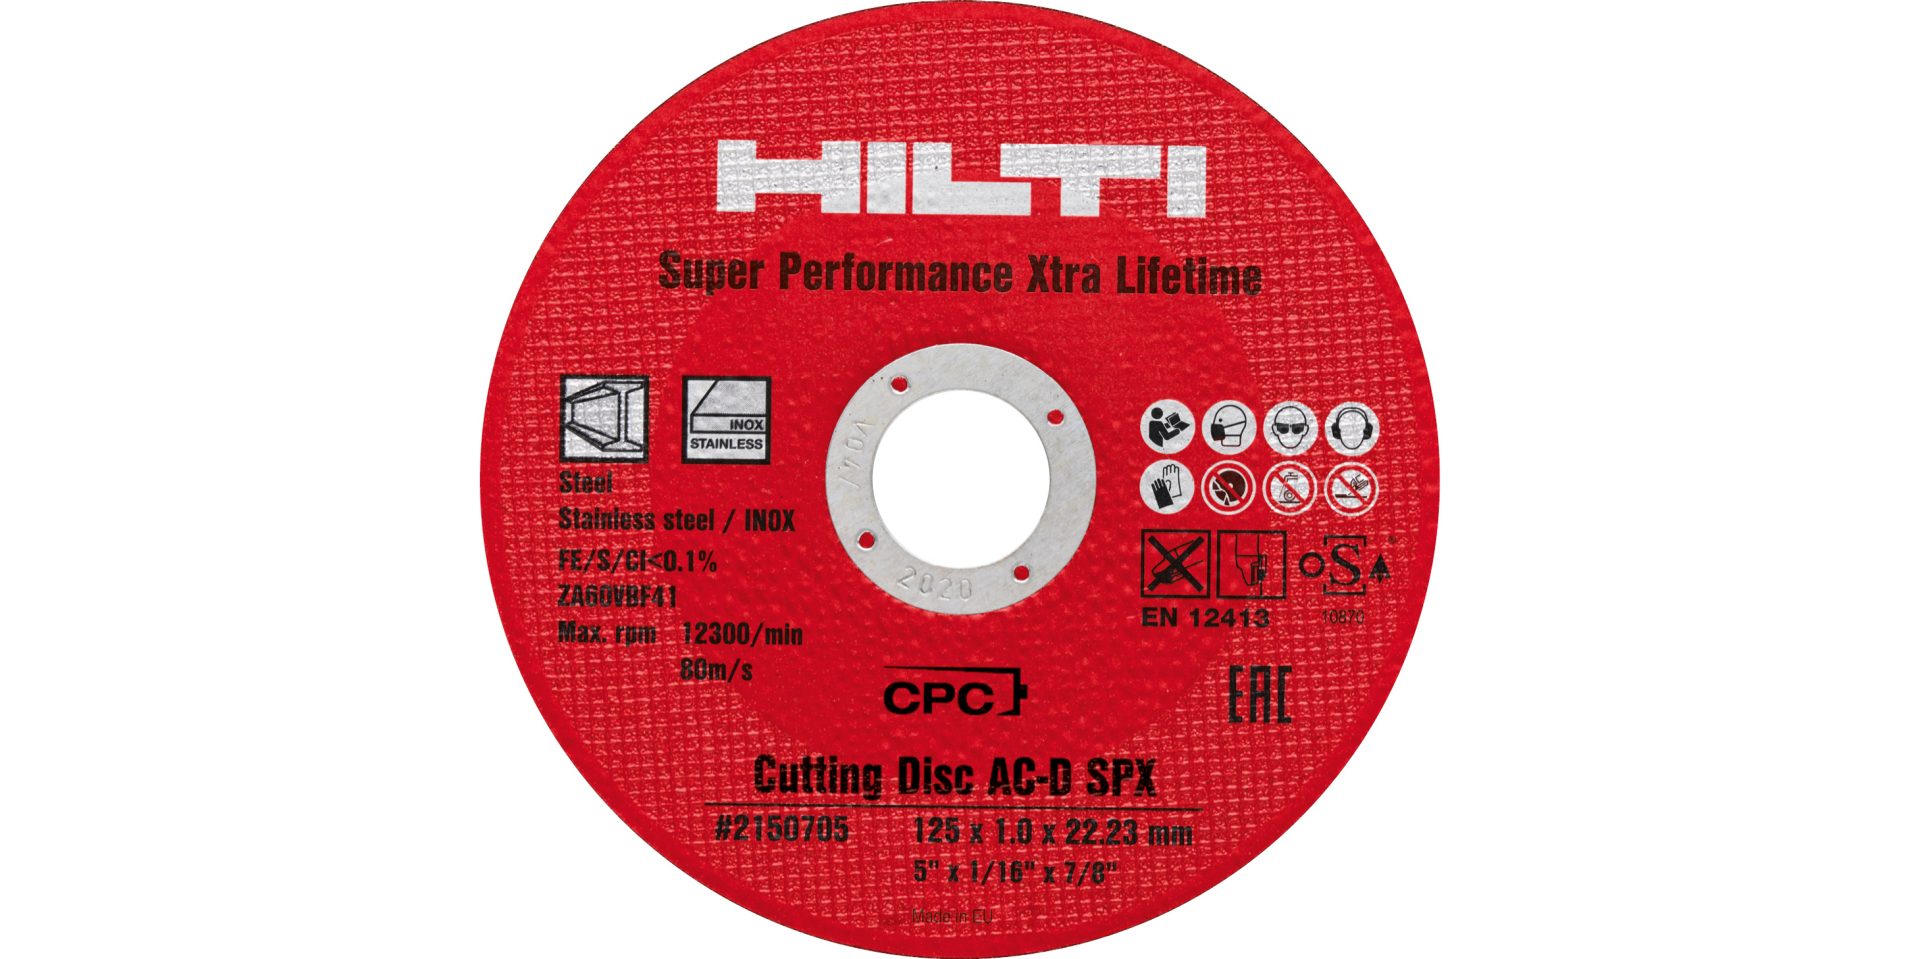 Ultimate abrasive cutting disc for metals offering extra-long lifetime and extra-high cutting speed